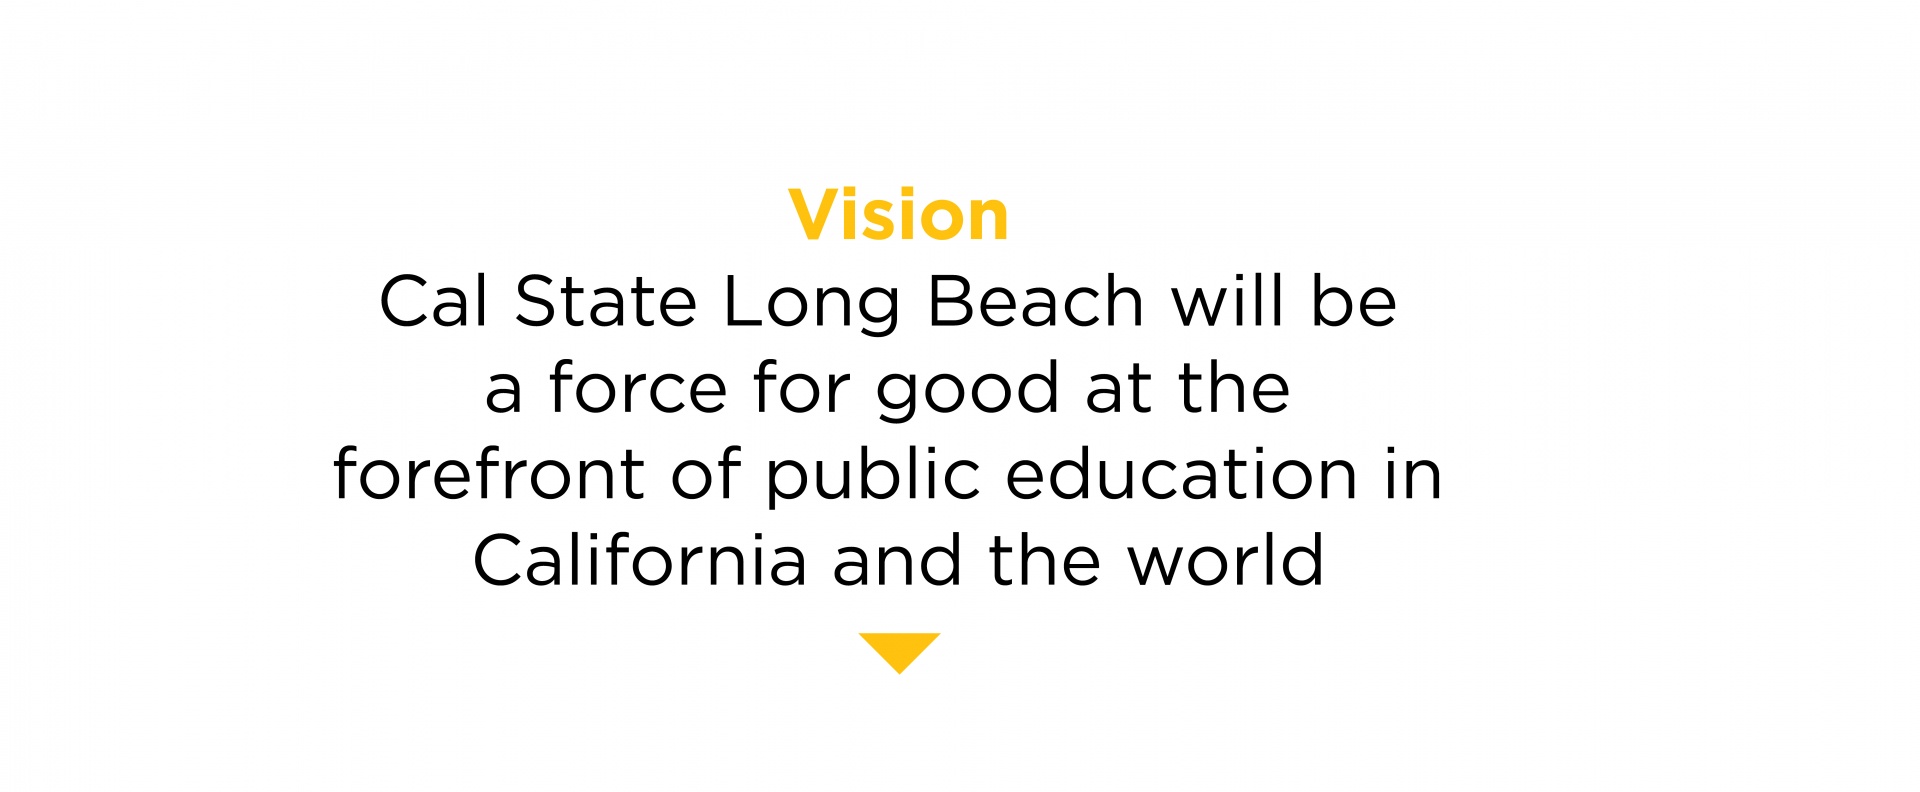 Vision: Cal State Long Beach will be a force for good at the forefront of public education in California and the world.